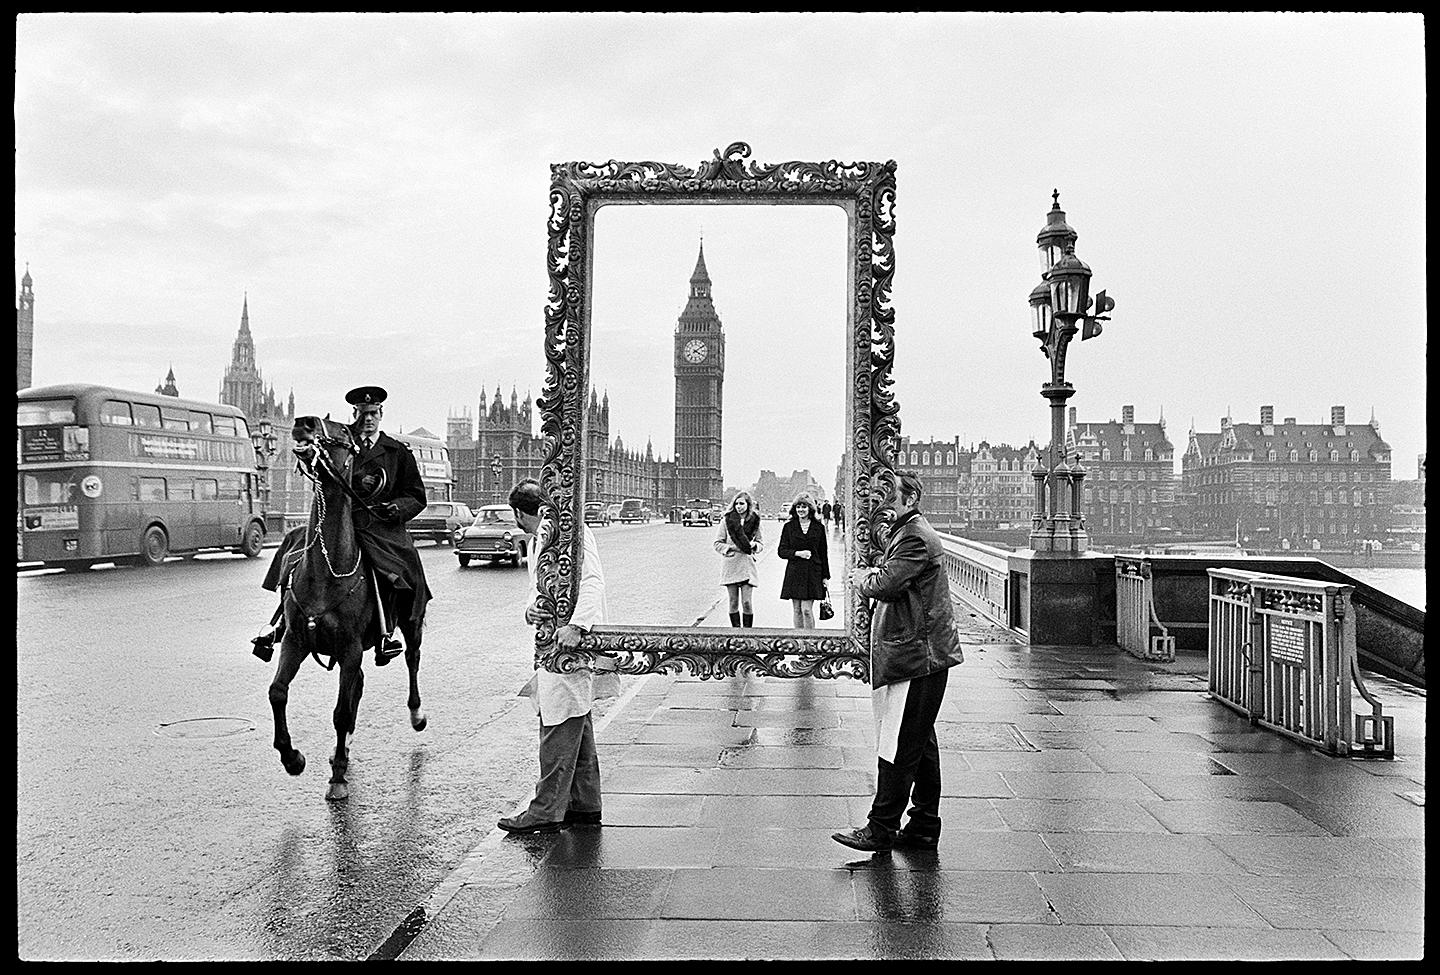 The Picture Frame Westminister Bridge 

By Arthur Steel 

Paper size: 44 x 33.5" / 112 x 85 cm

Silver Gelatin Print
1960 (printed later)
unframed
hand signed
limited edition of 30

note other print sizes and framing options are available, please